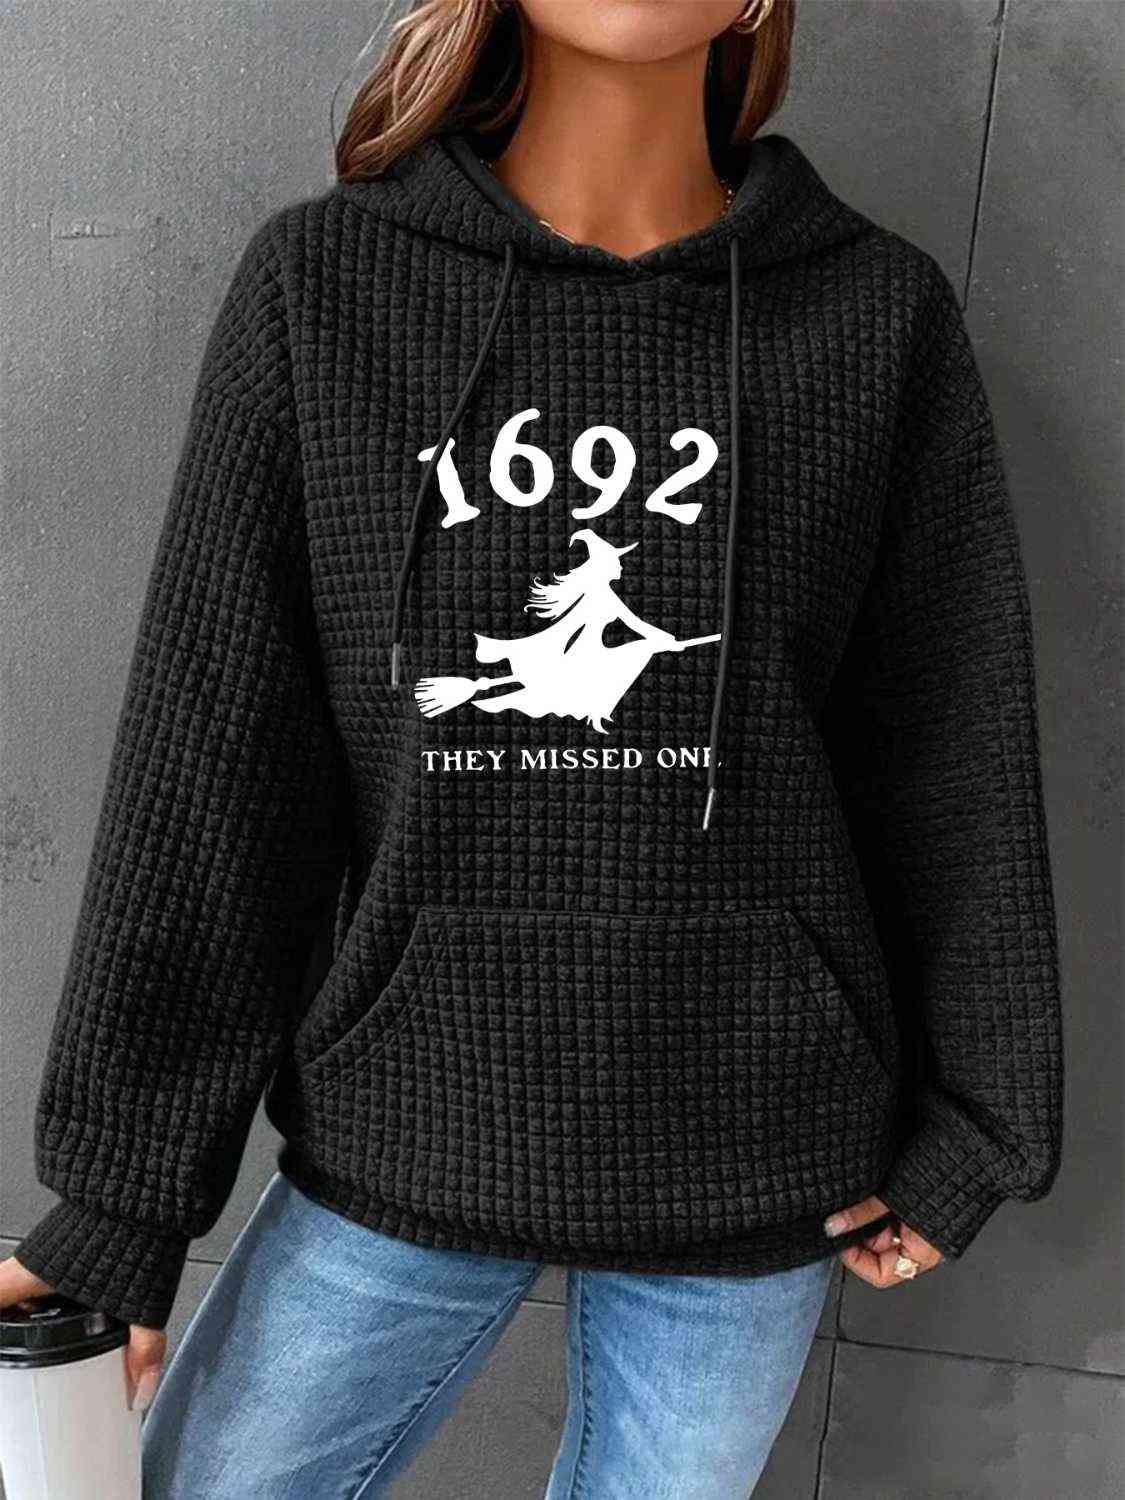 1962 THEY MISSED ONE Graphic Hoodie with Front Pocket - By Baano